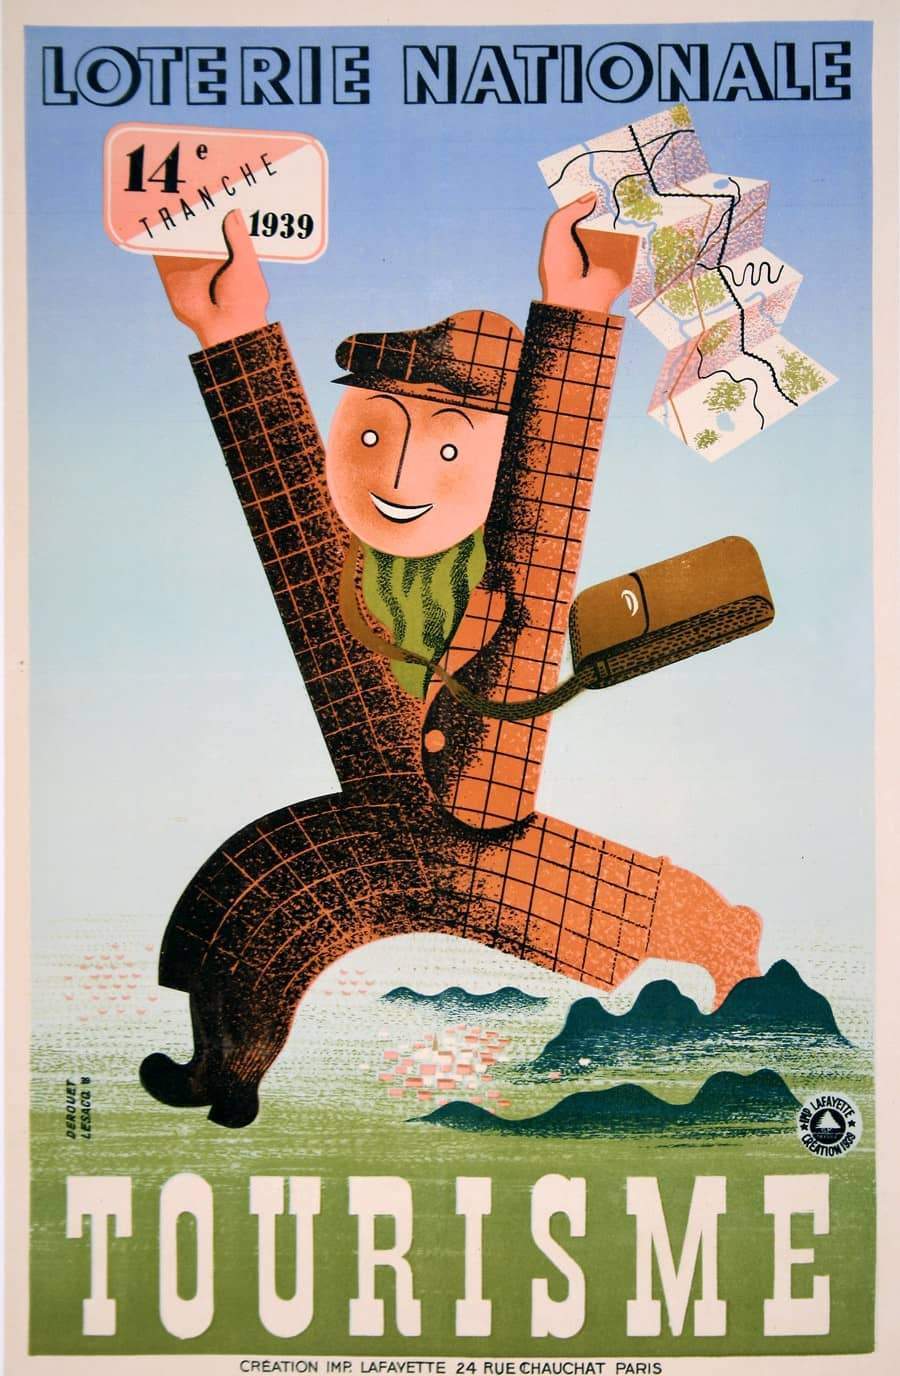 Loterie Nationale French Poster by Derouet Lesacq c1939 Tourisme